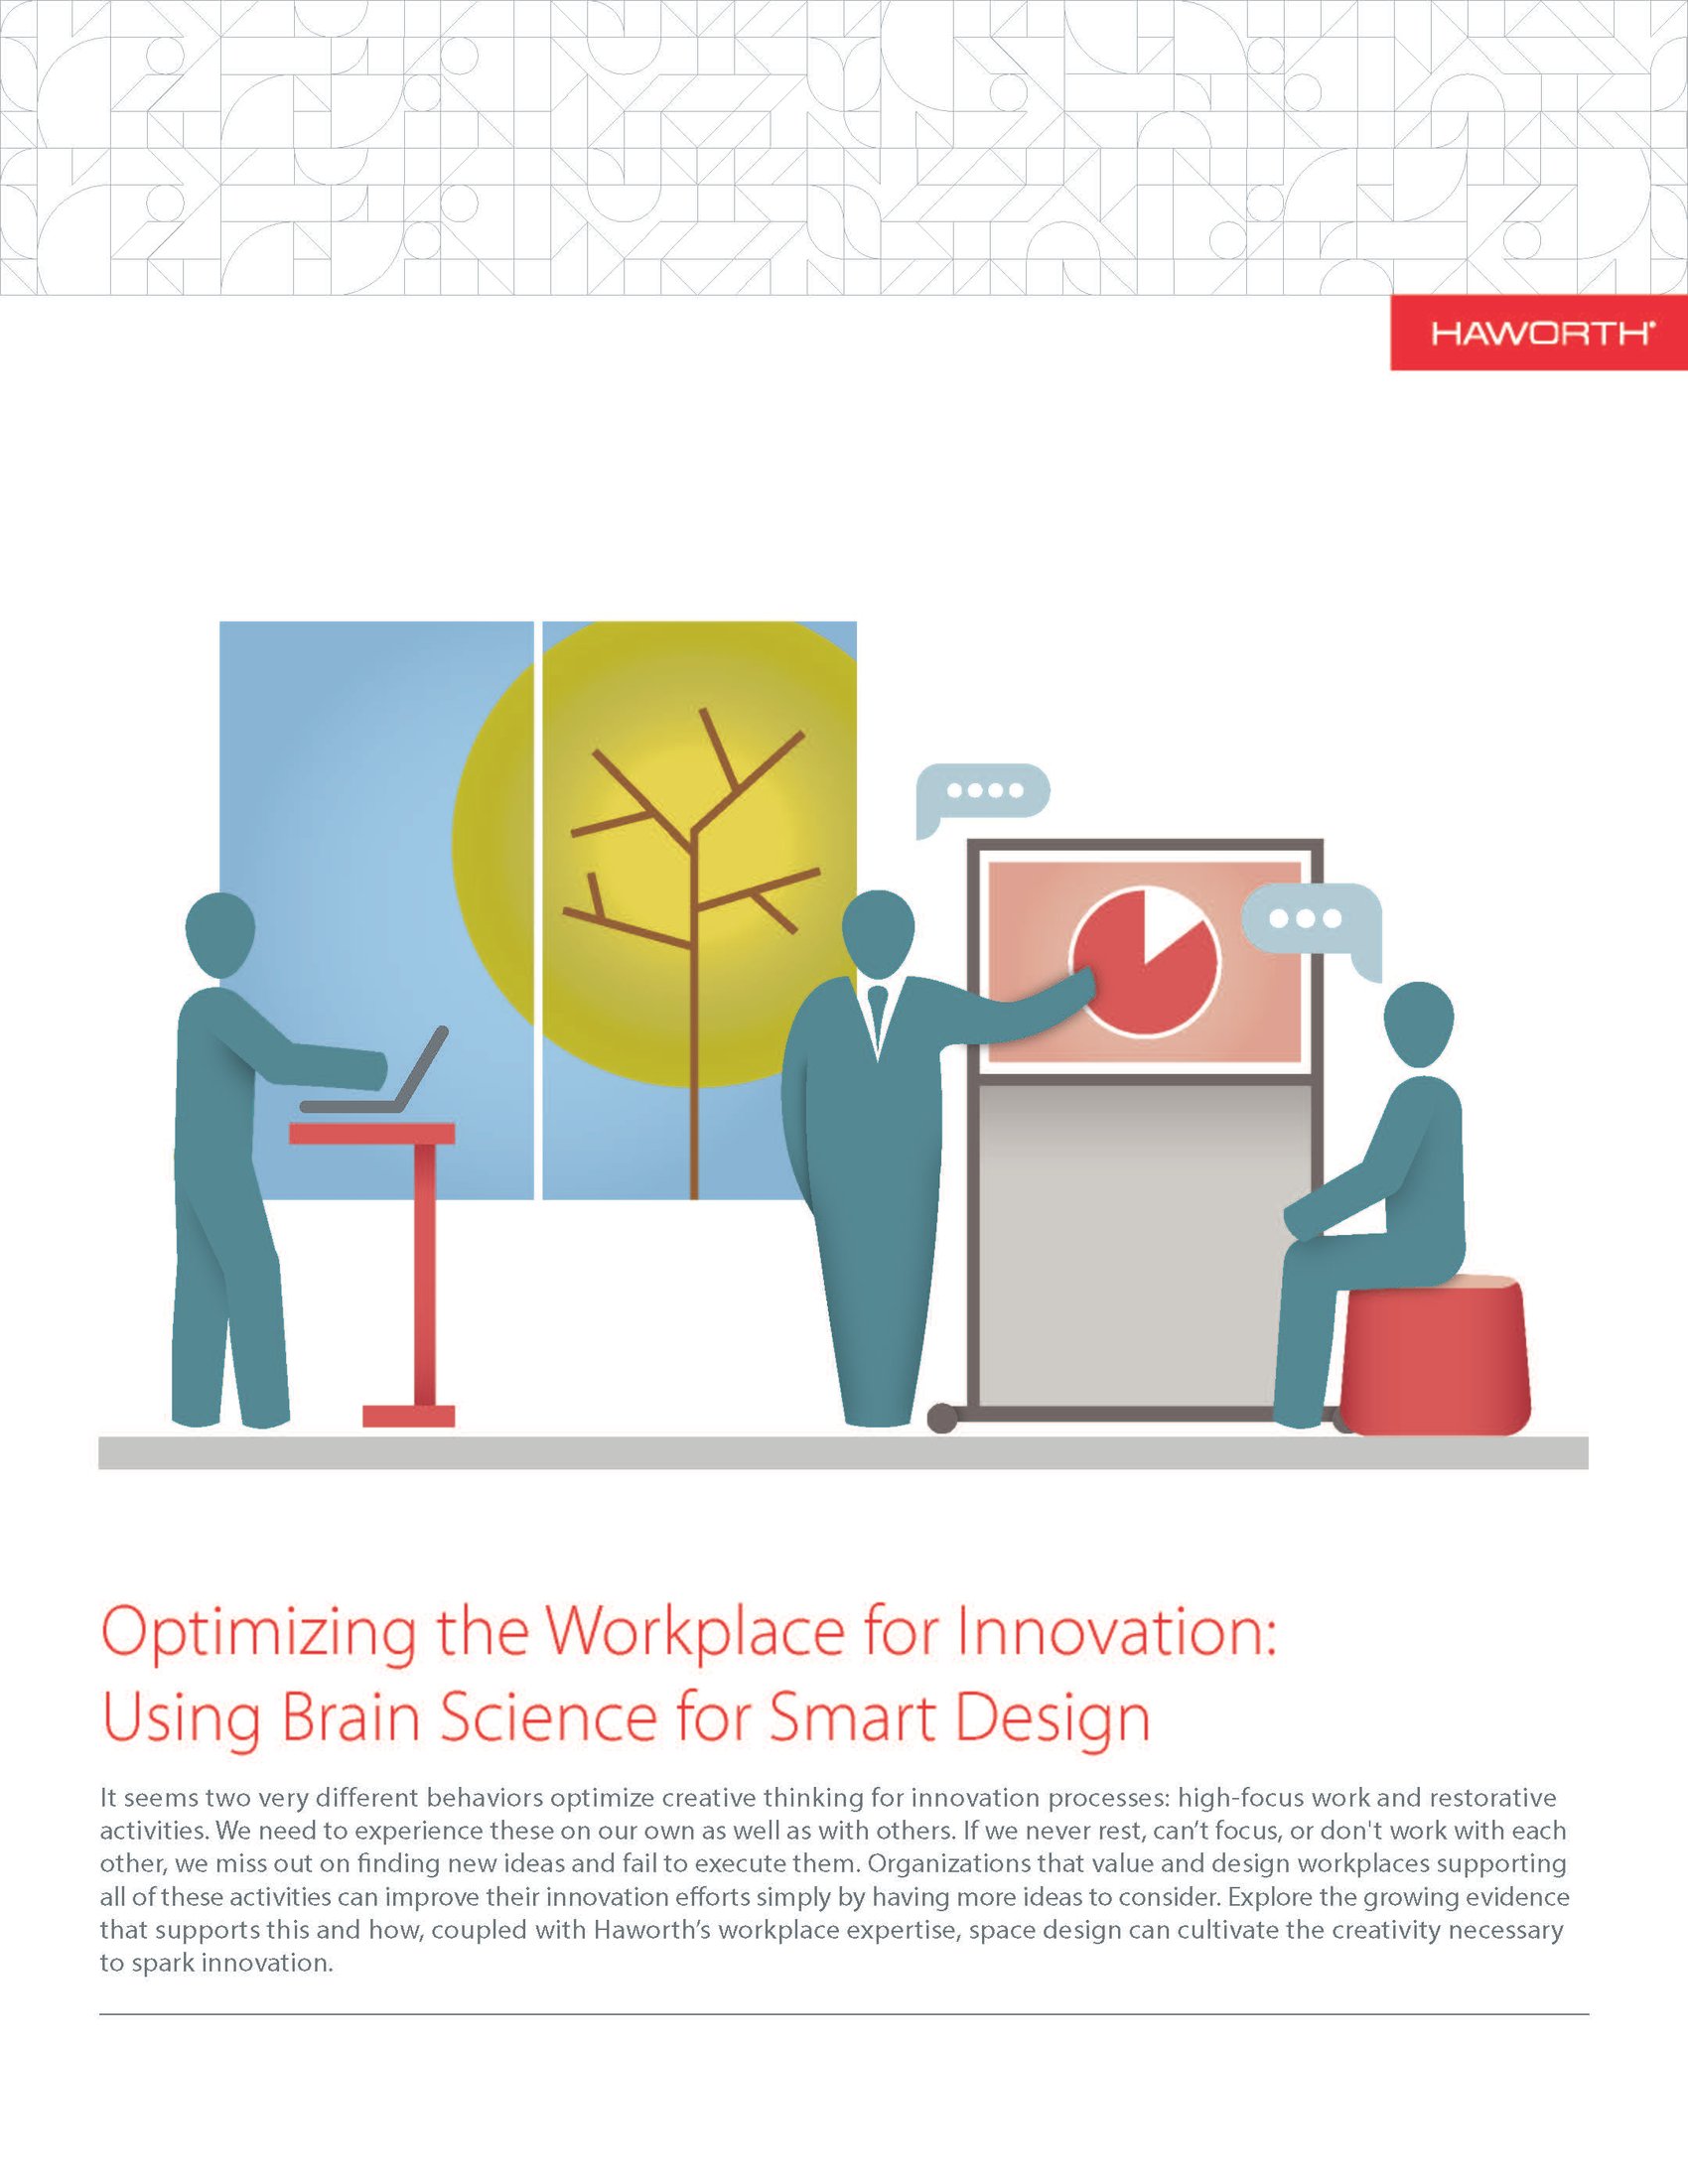 Innovation in the workplace